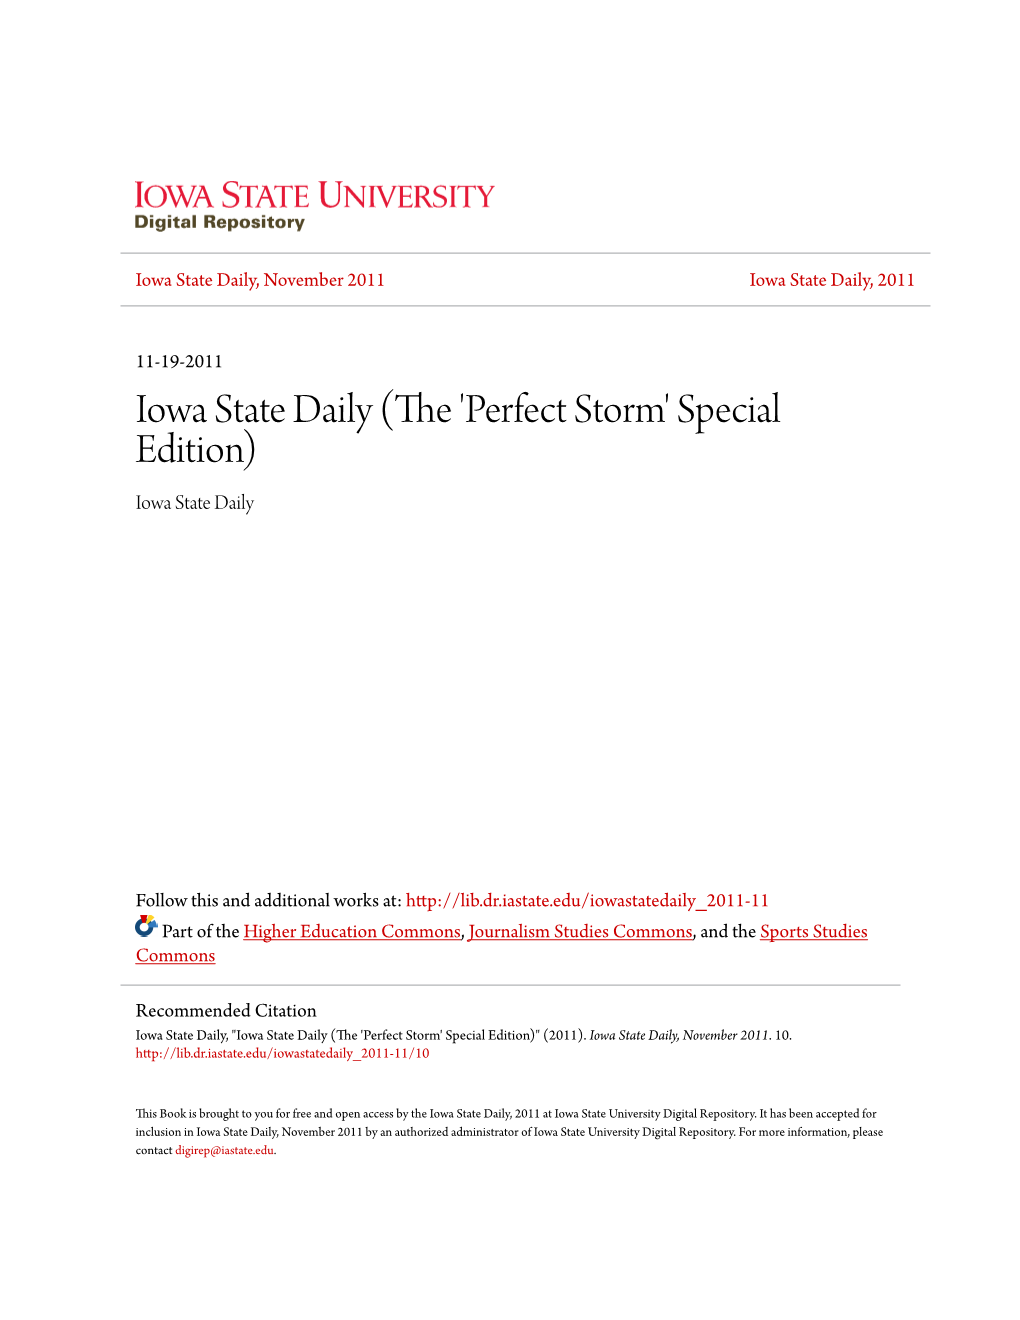 Iowa State Daily (The'perfect Storm'special Edition)